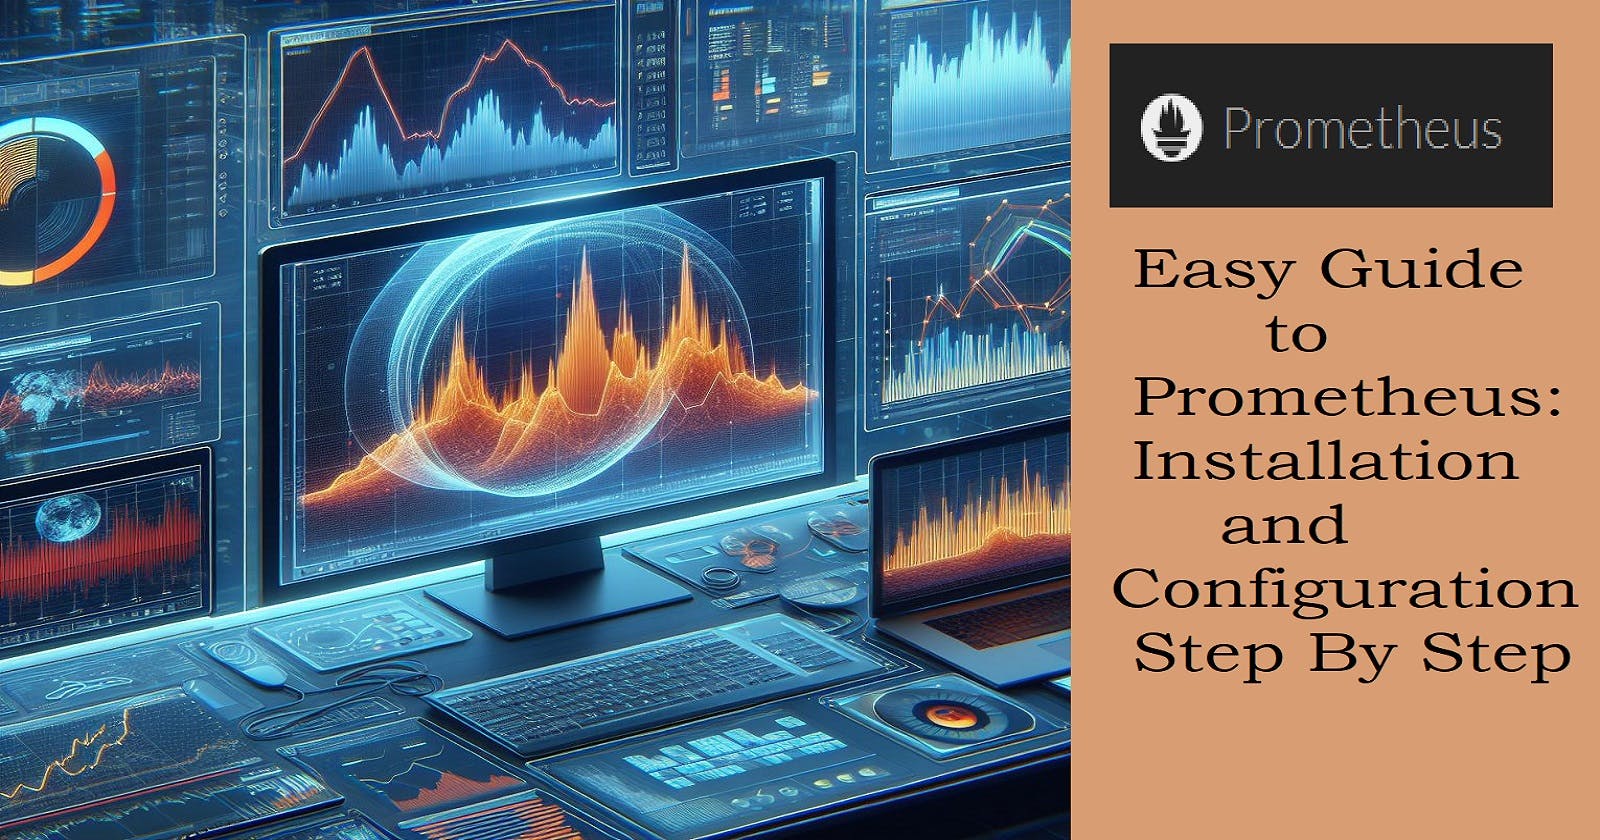 Easy Guide to Prometheus: Installation and Configuration